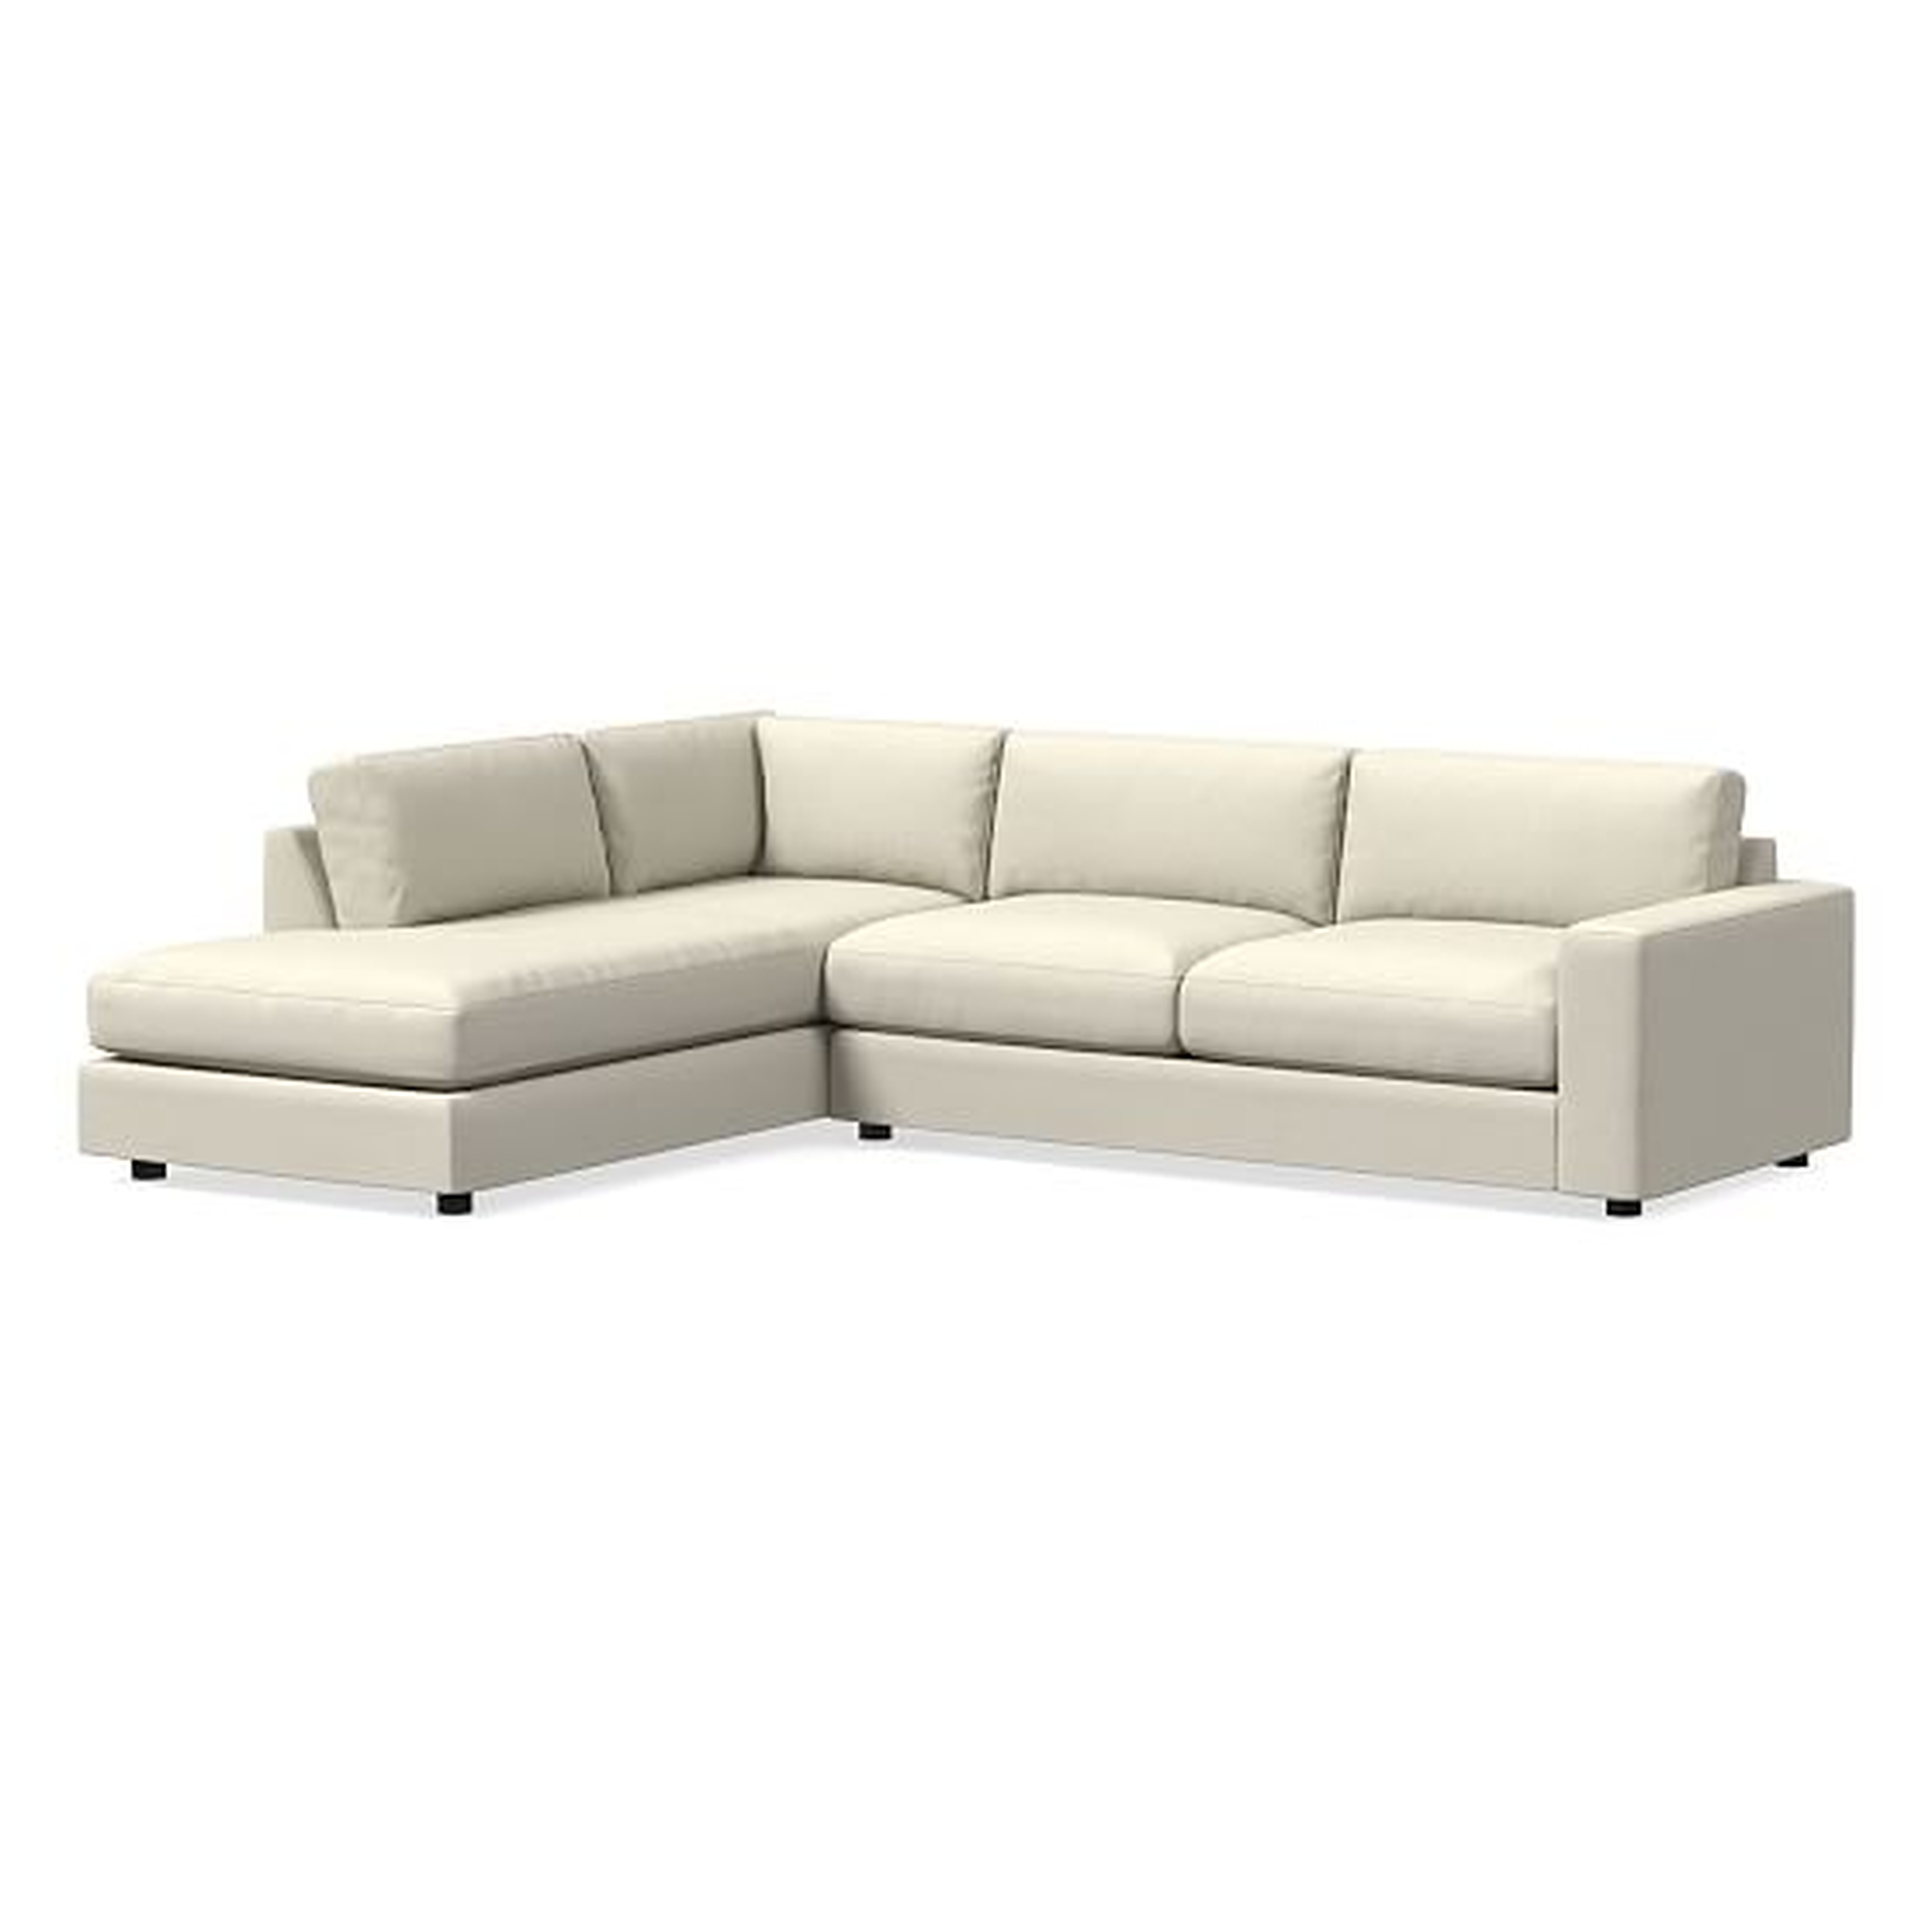 Urban Sectional Set 20: Right Arm 3 Seater Sofa, Left Arm Terminal Chaise, Down Blend, Performance Basketweave, Natural - West Elm